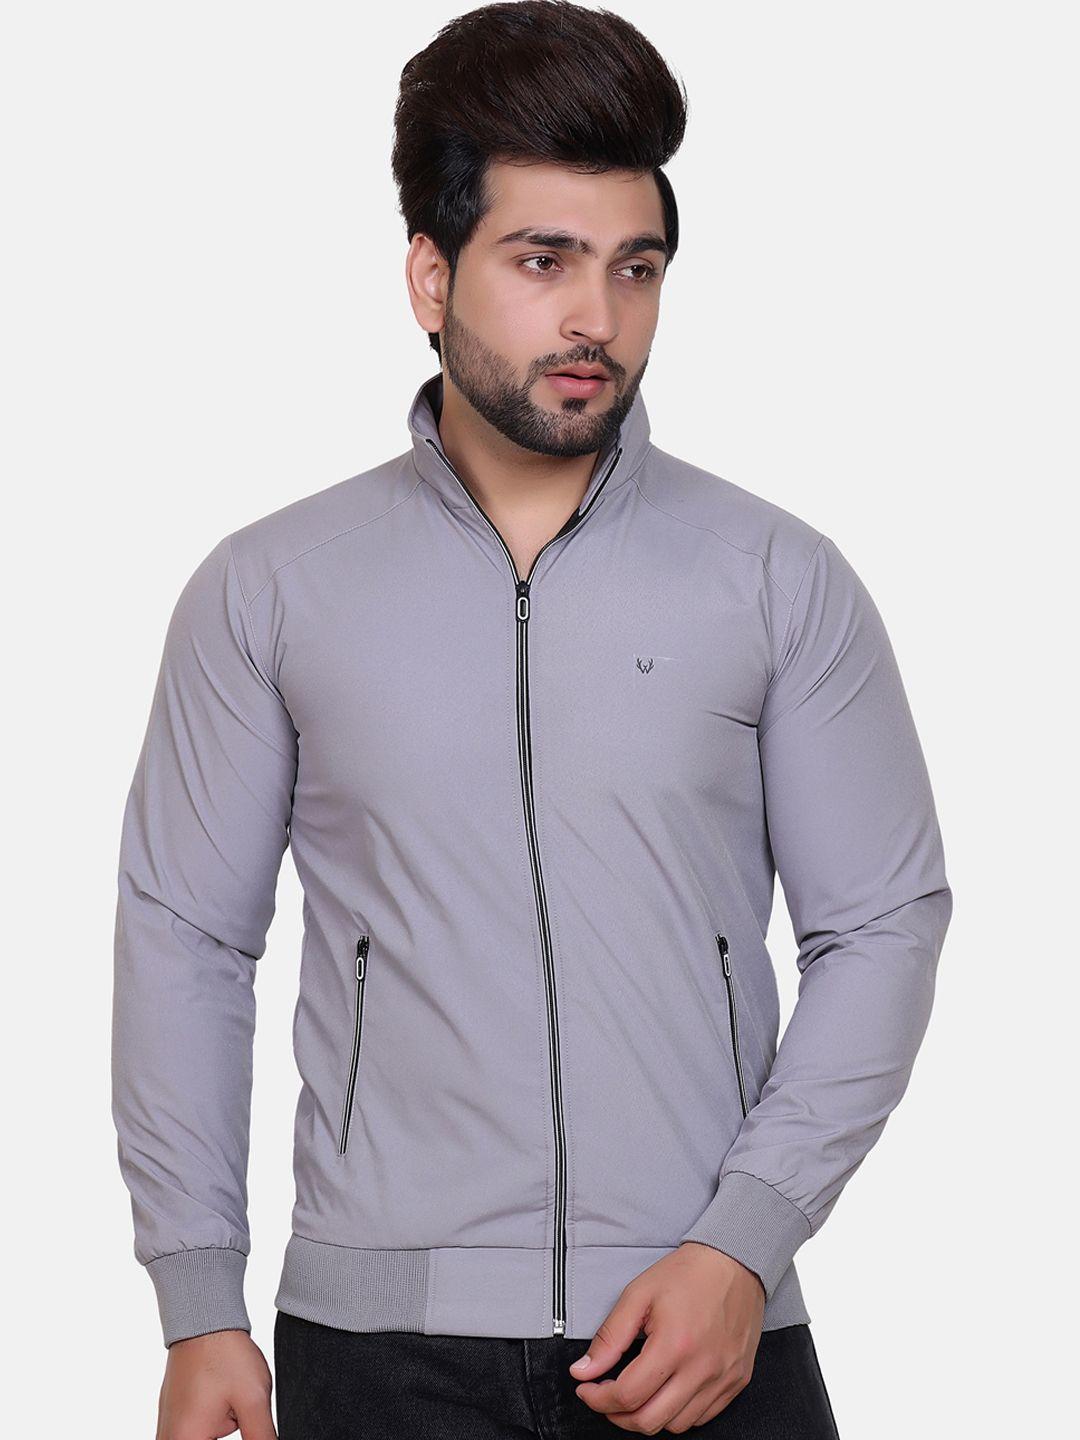 wild-west-men-geometric-striped-water-resistant-crop-training-or-gym-open-front-jacket